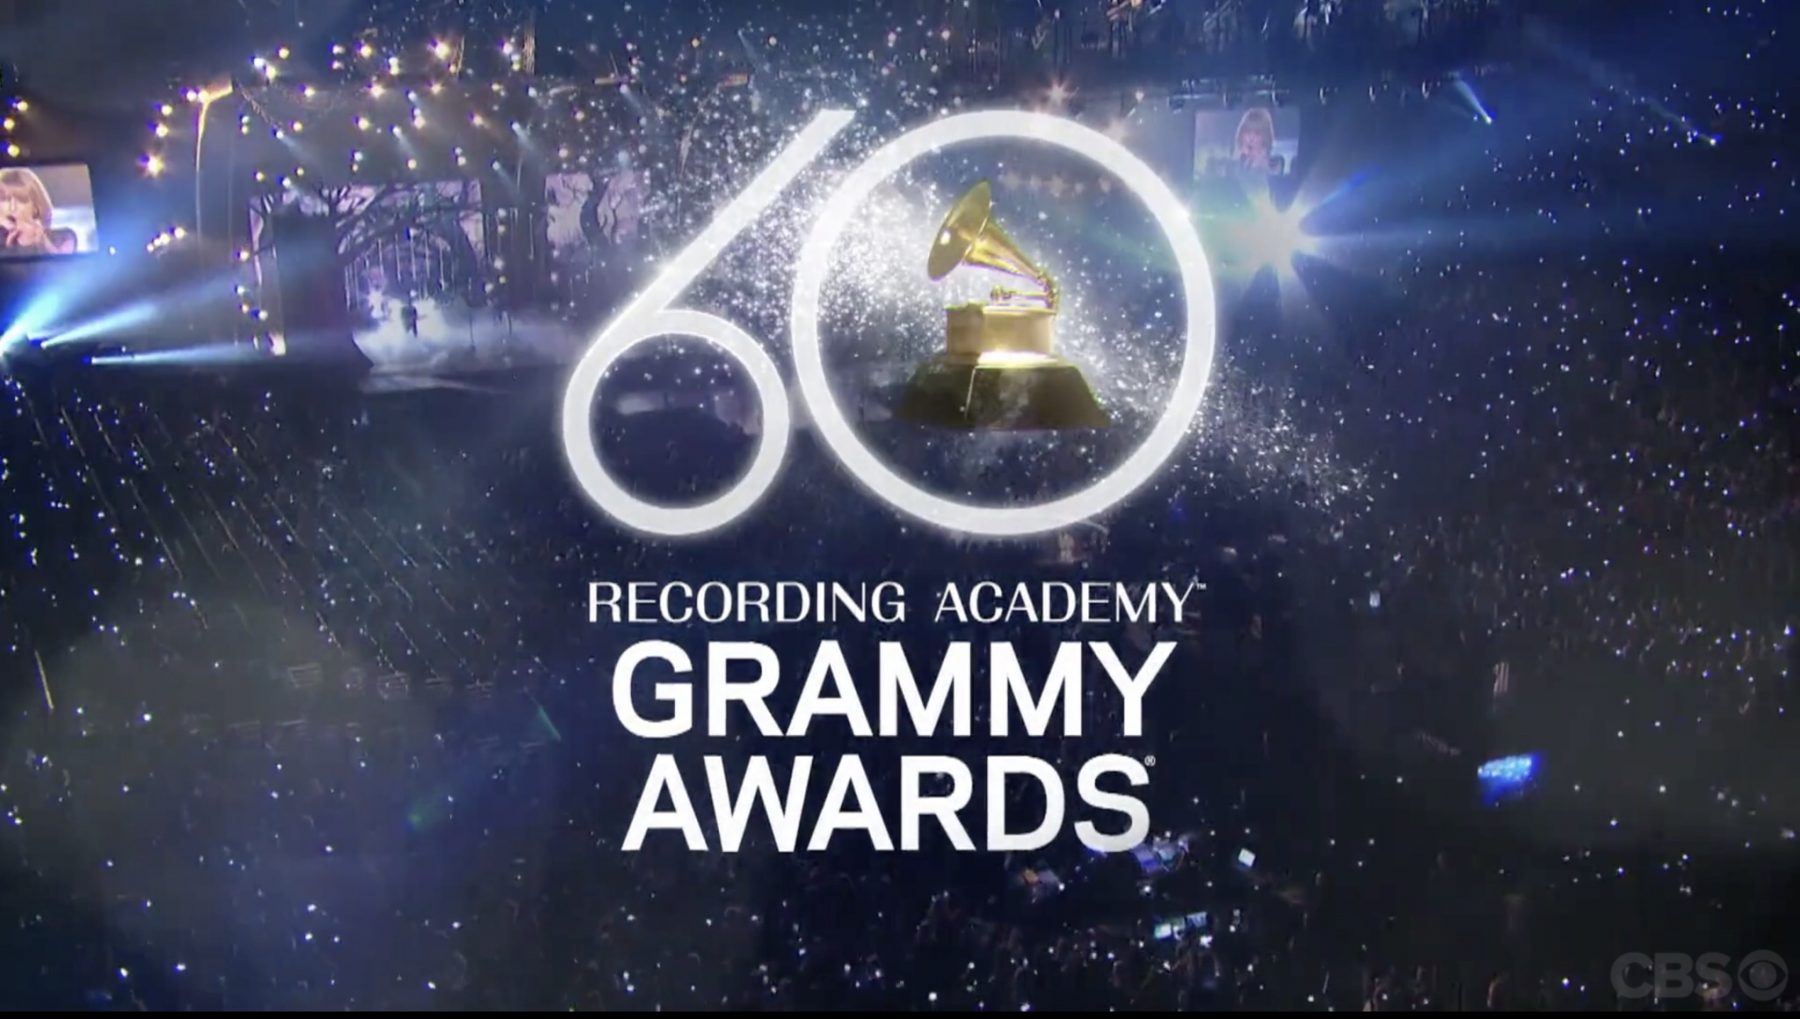 What the Grammy Awards viewership decline tells about future On my Om